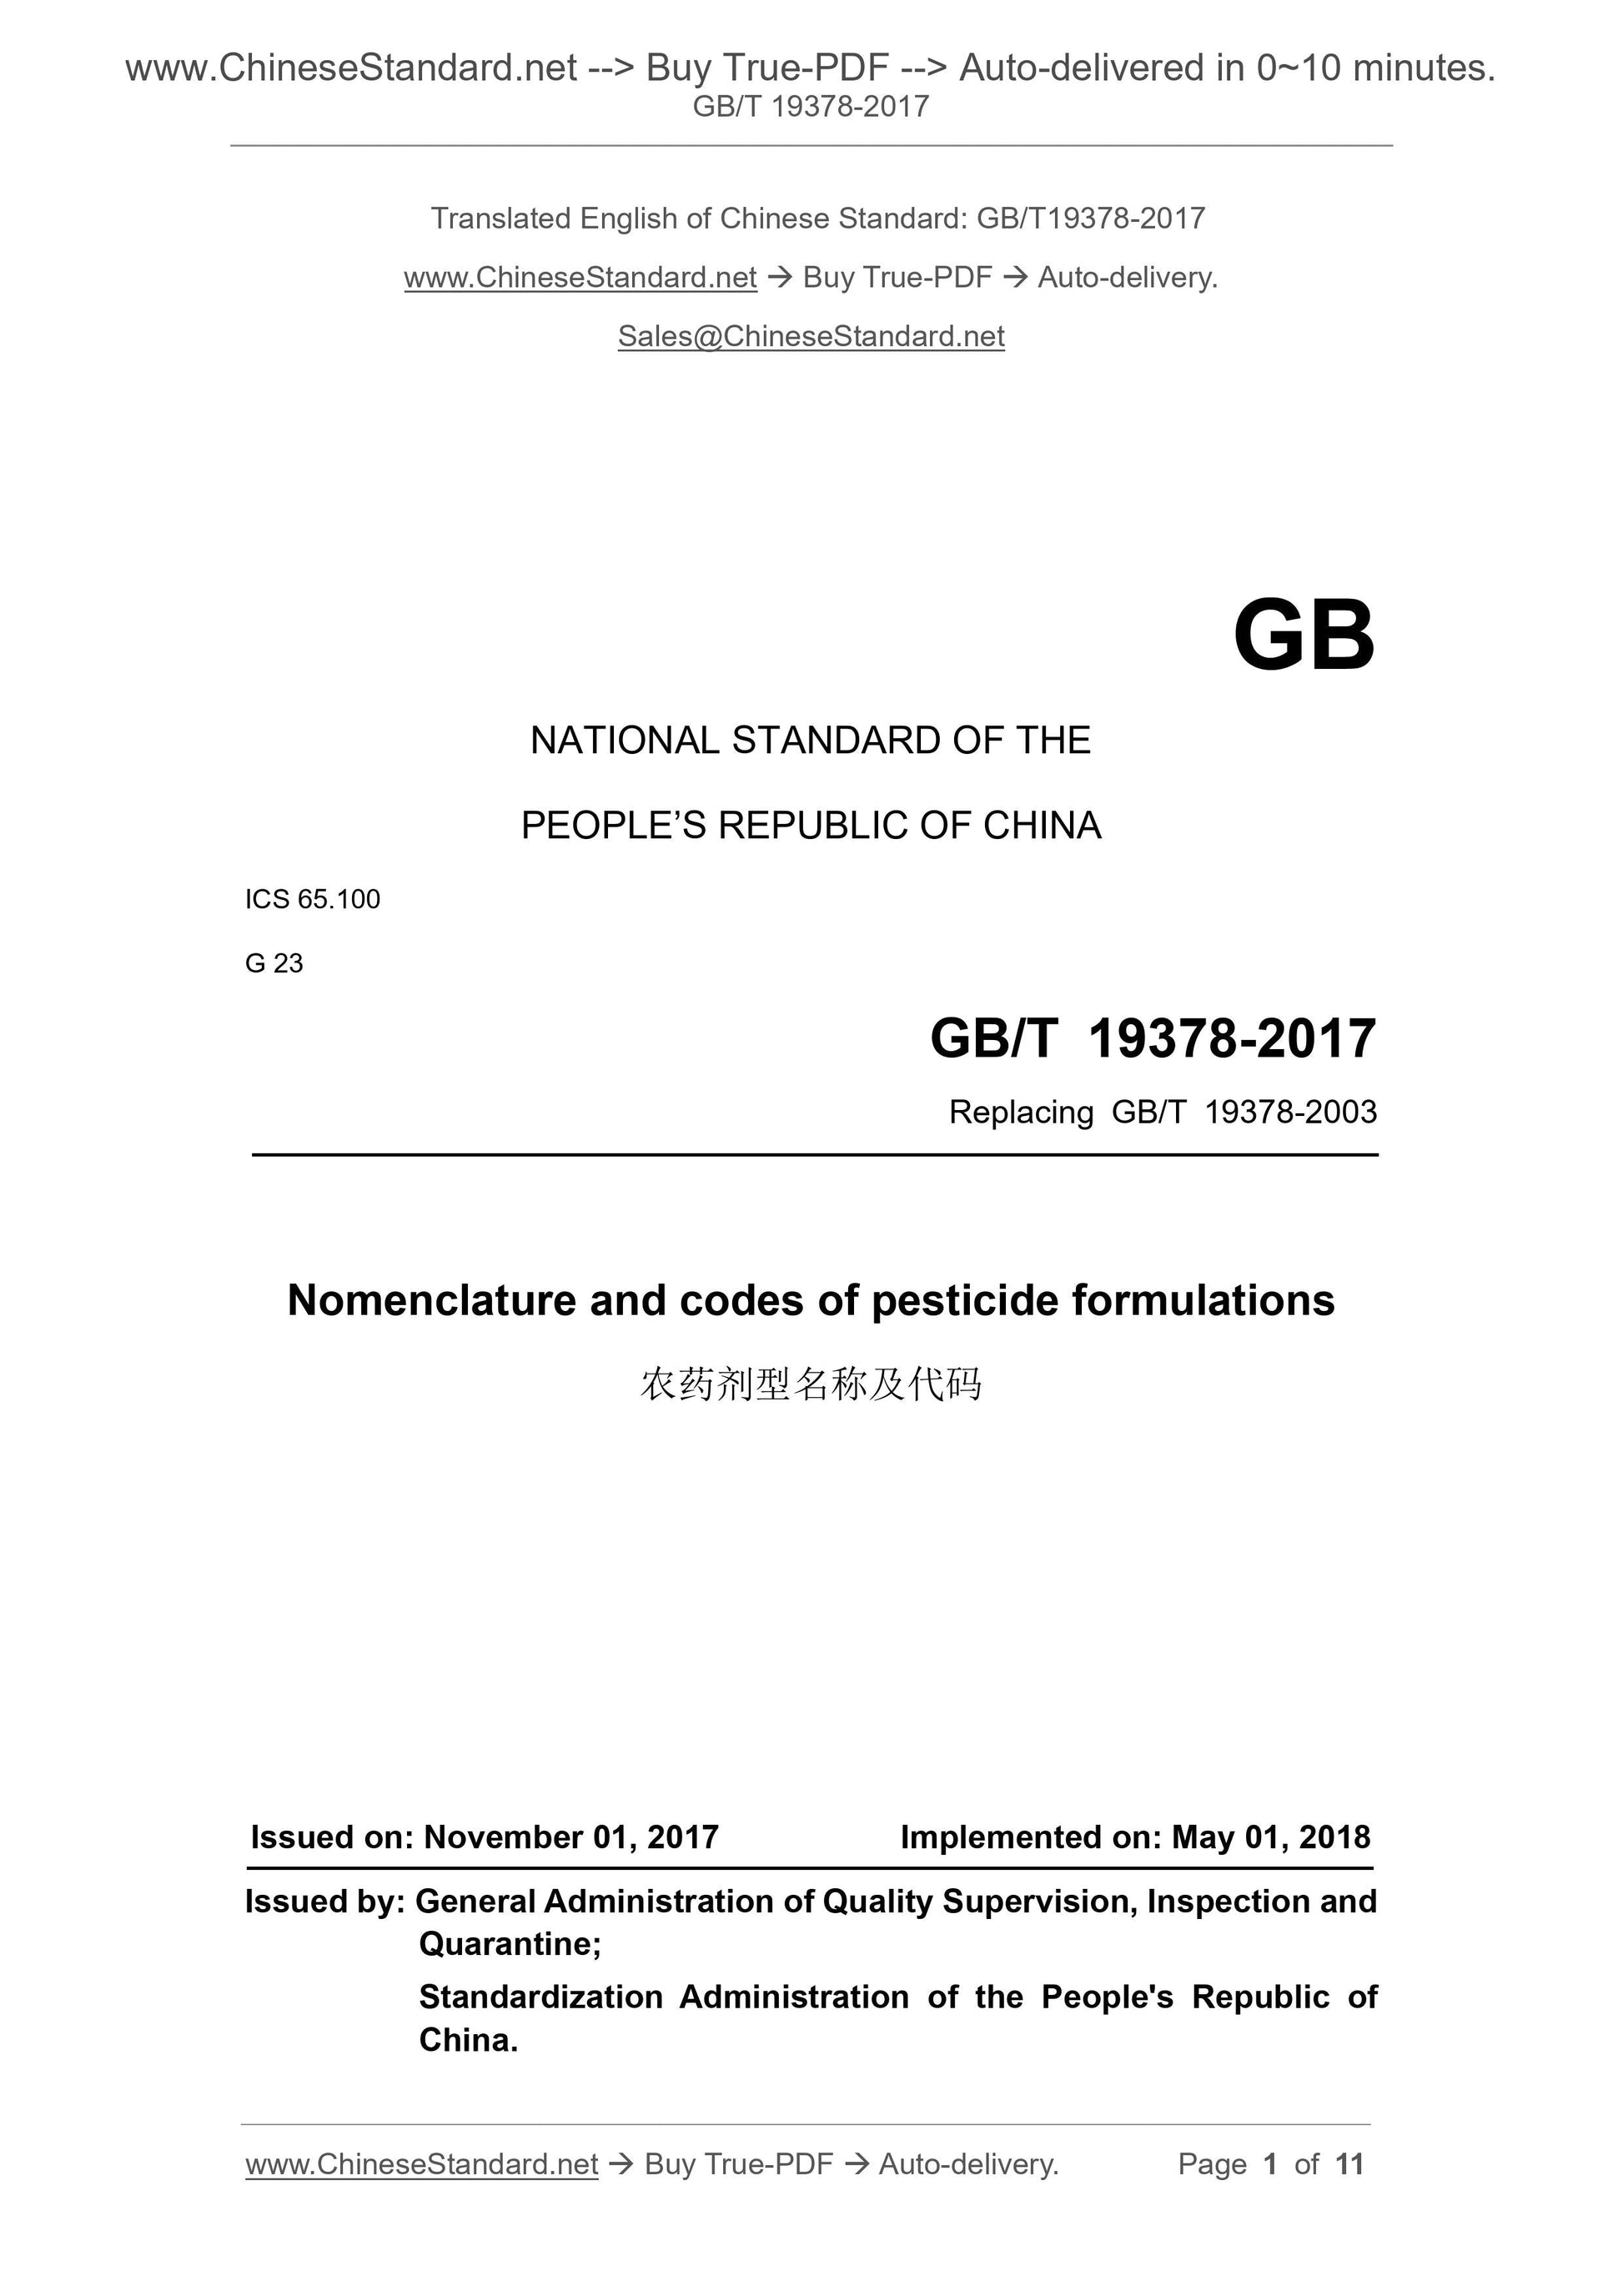 GB/T 19378-2017 Page 1